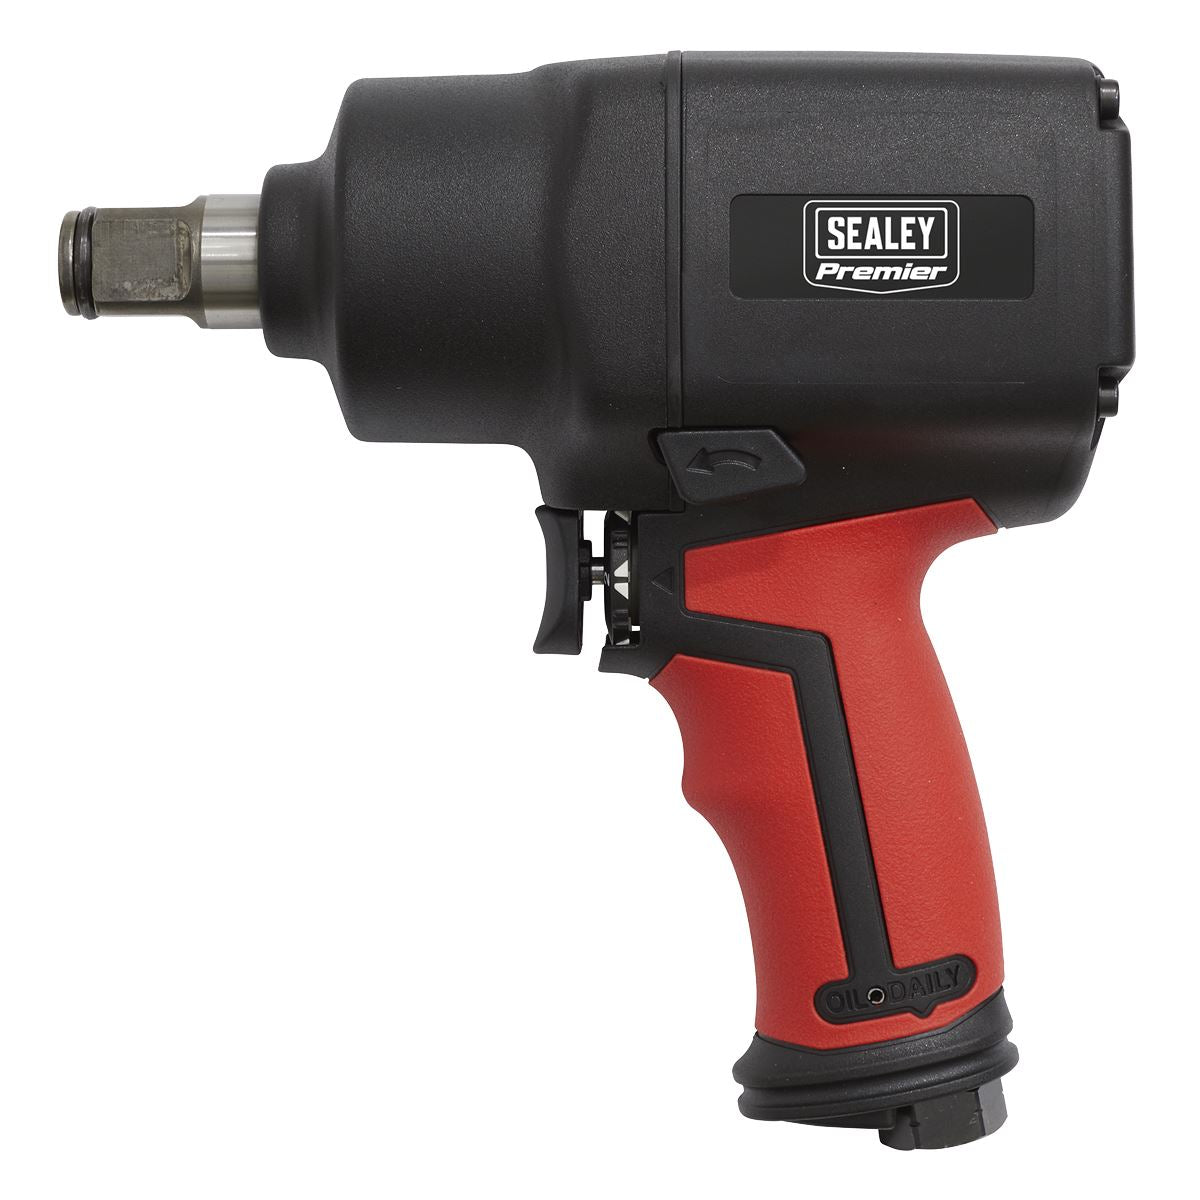 Sealey Premier Air Impact Wrench 3/4"Sq Drive Compact Twin Hammer